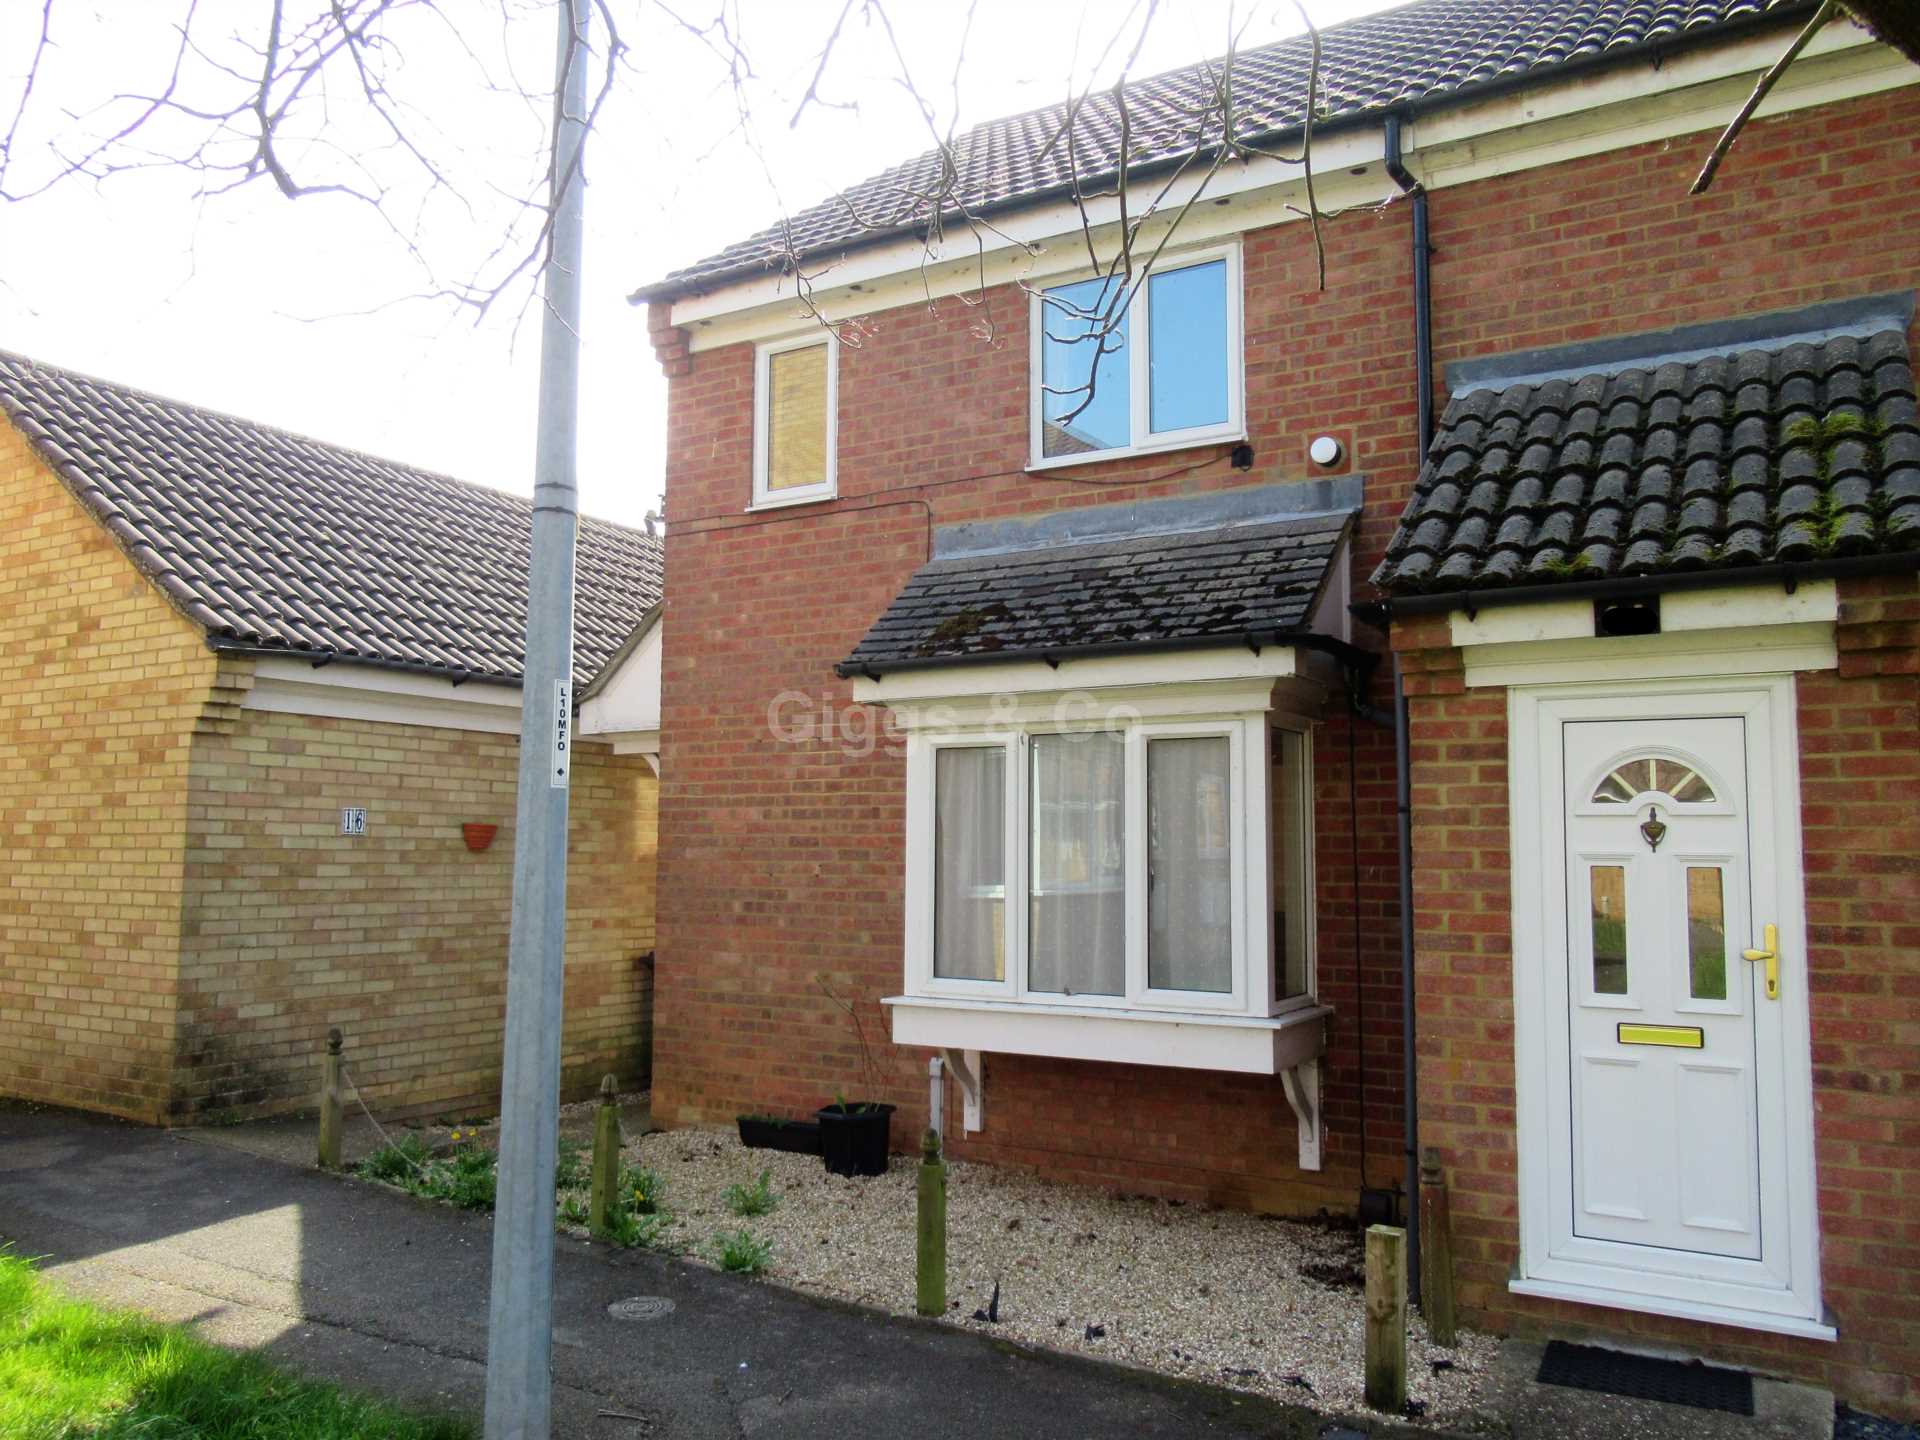 3 bed  to rent in Begwary Close, Eaton Socon 0